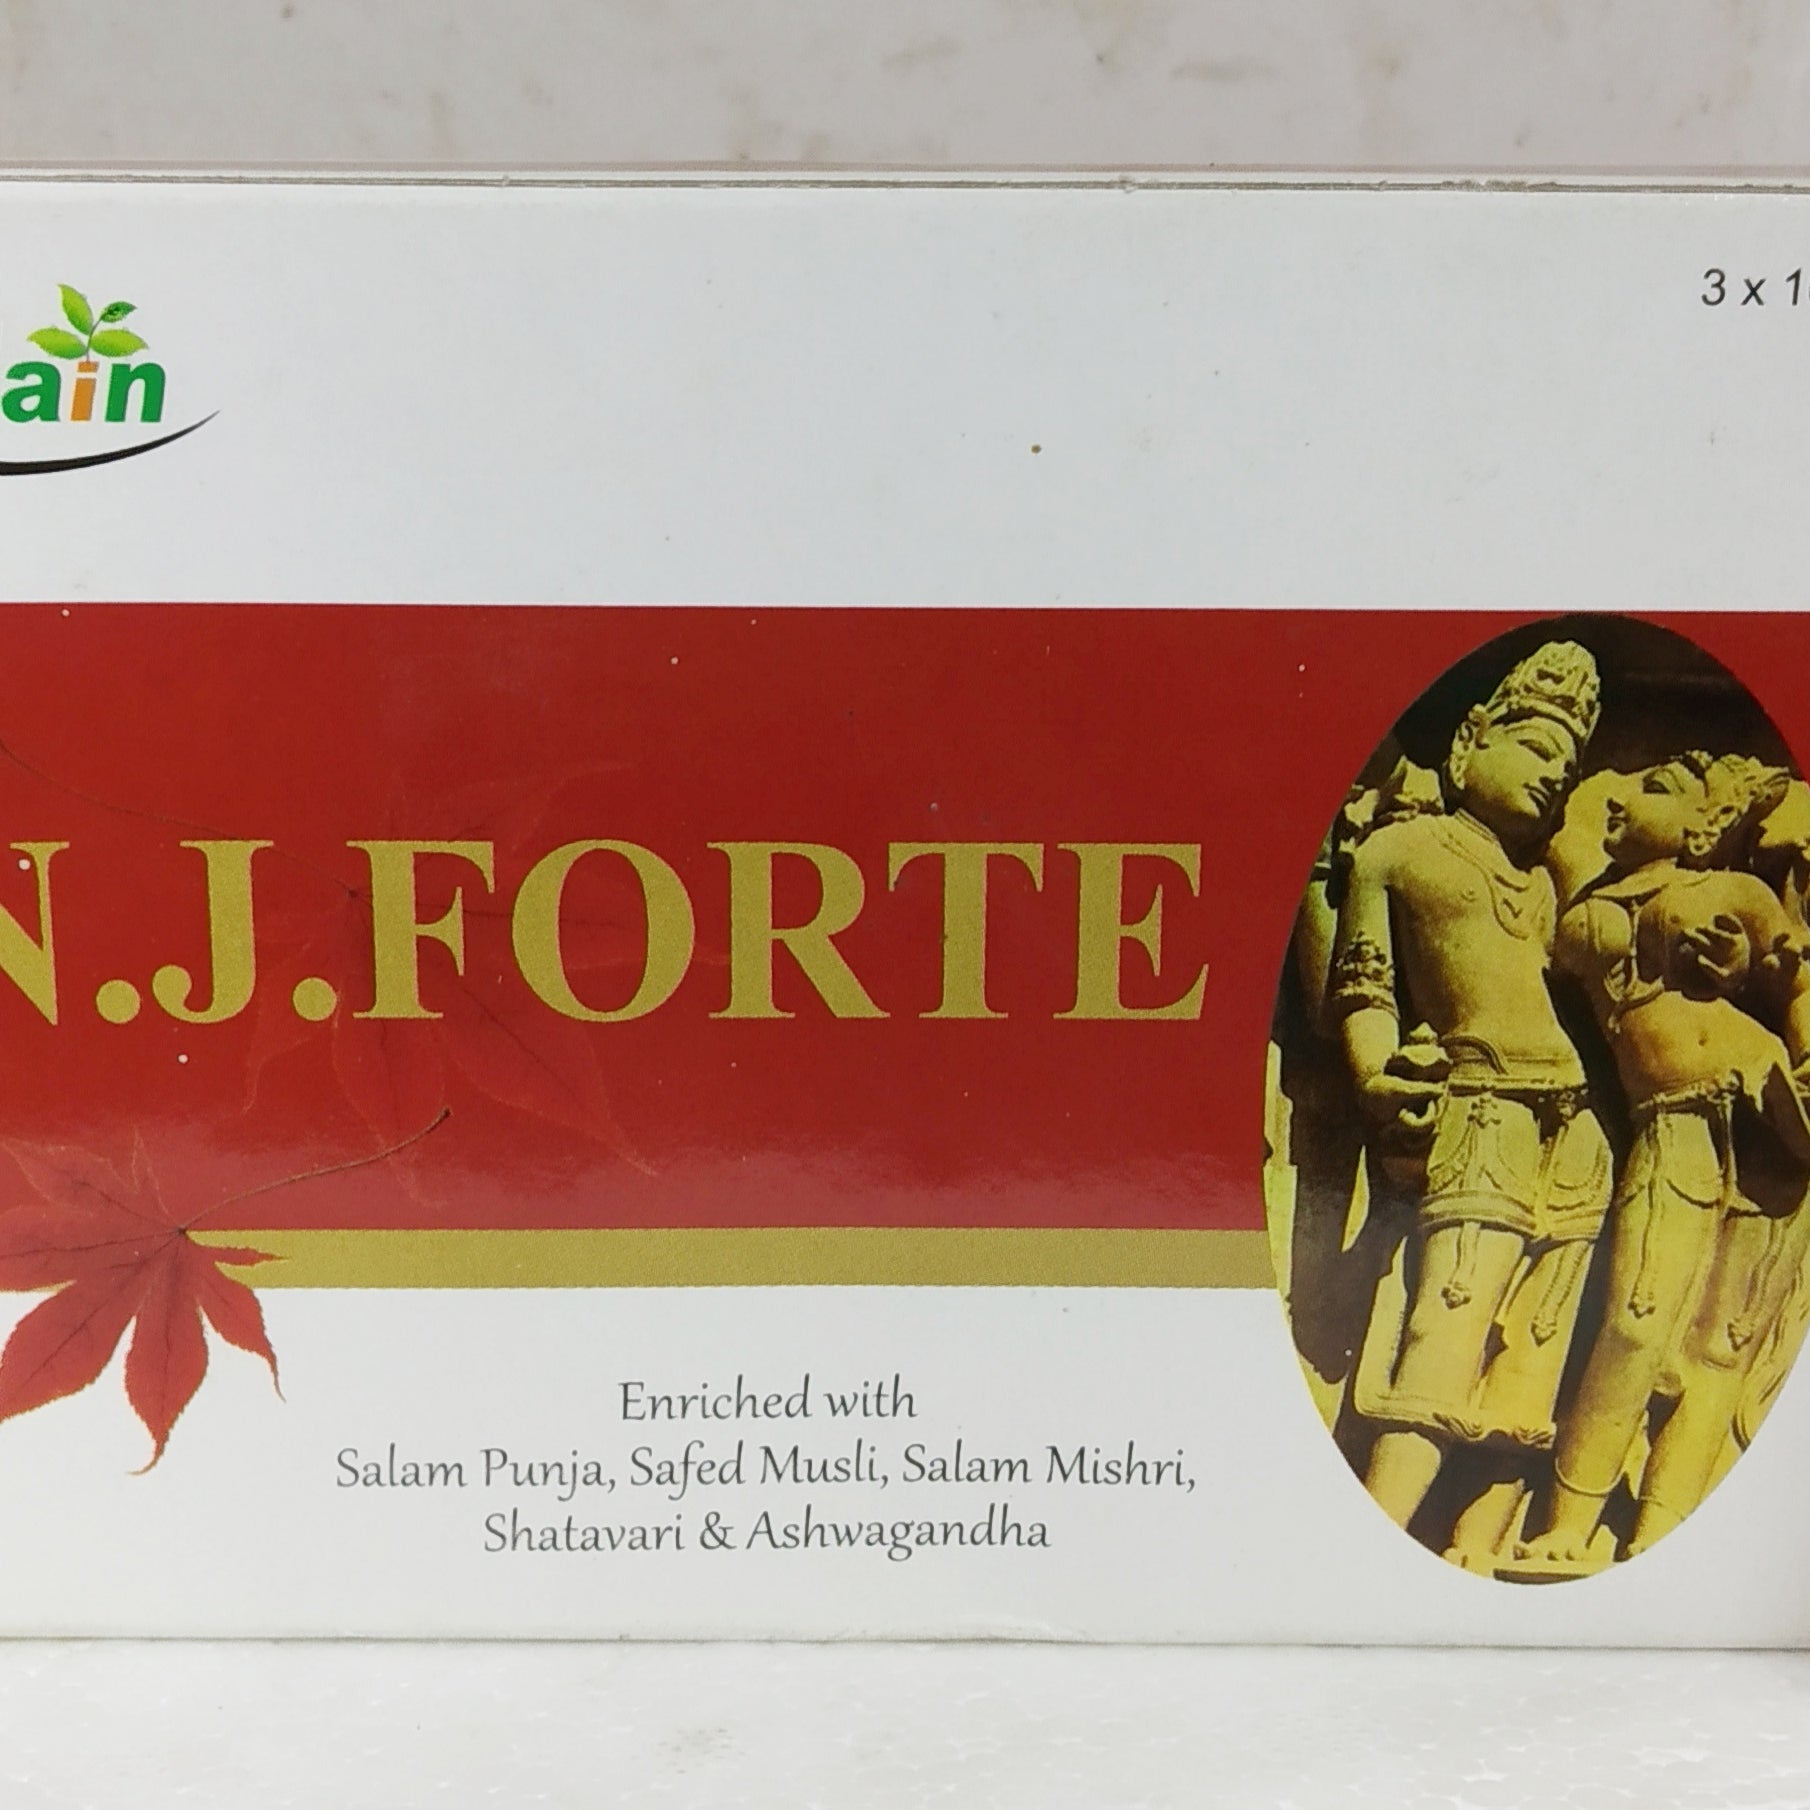 Shop NJ Forte 10Capsules at price 100.00 from Jain Online - Ayush Care